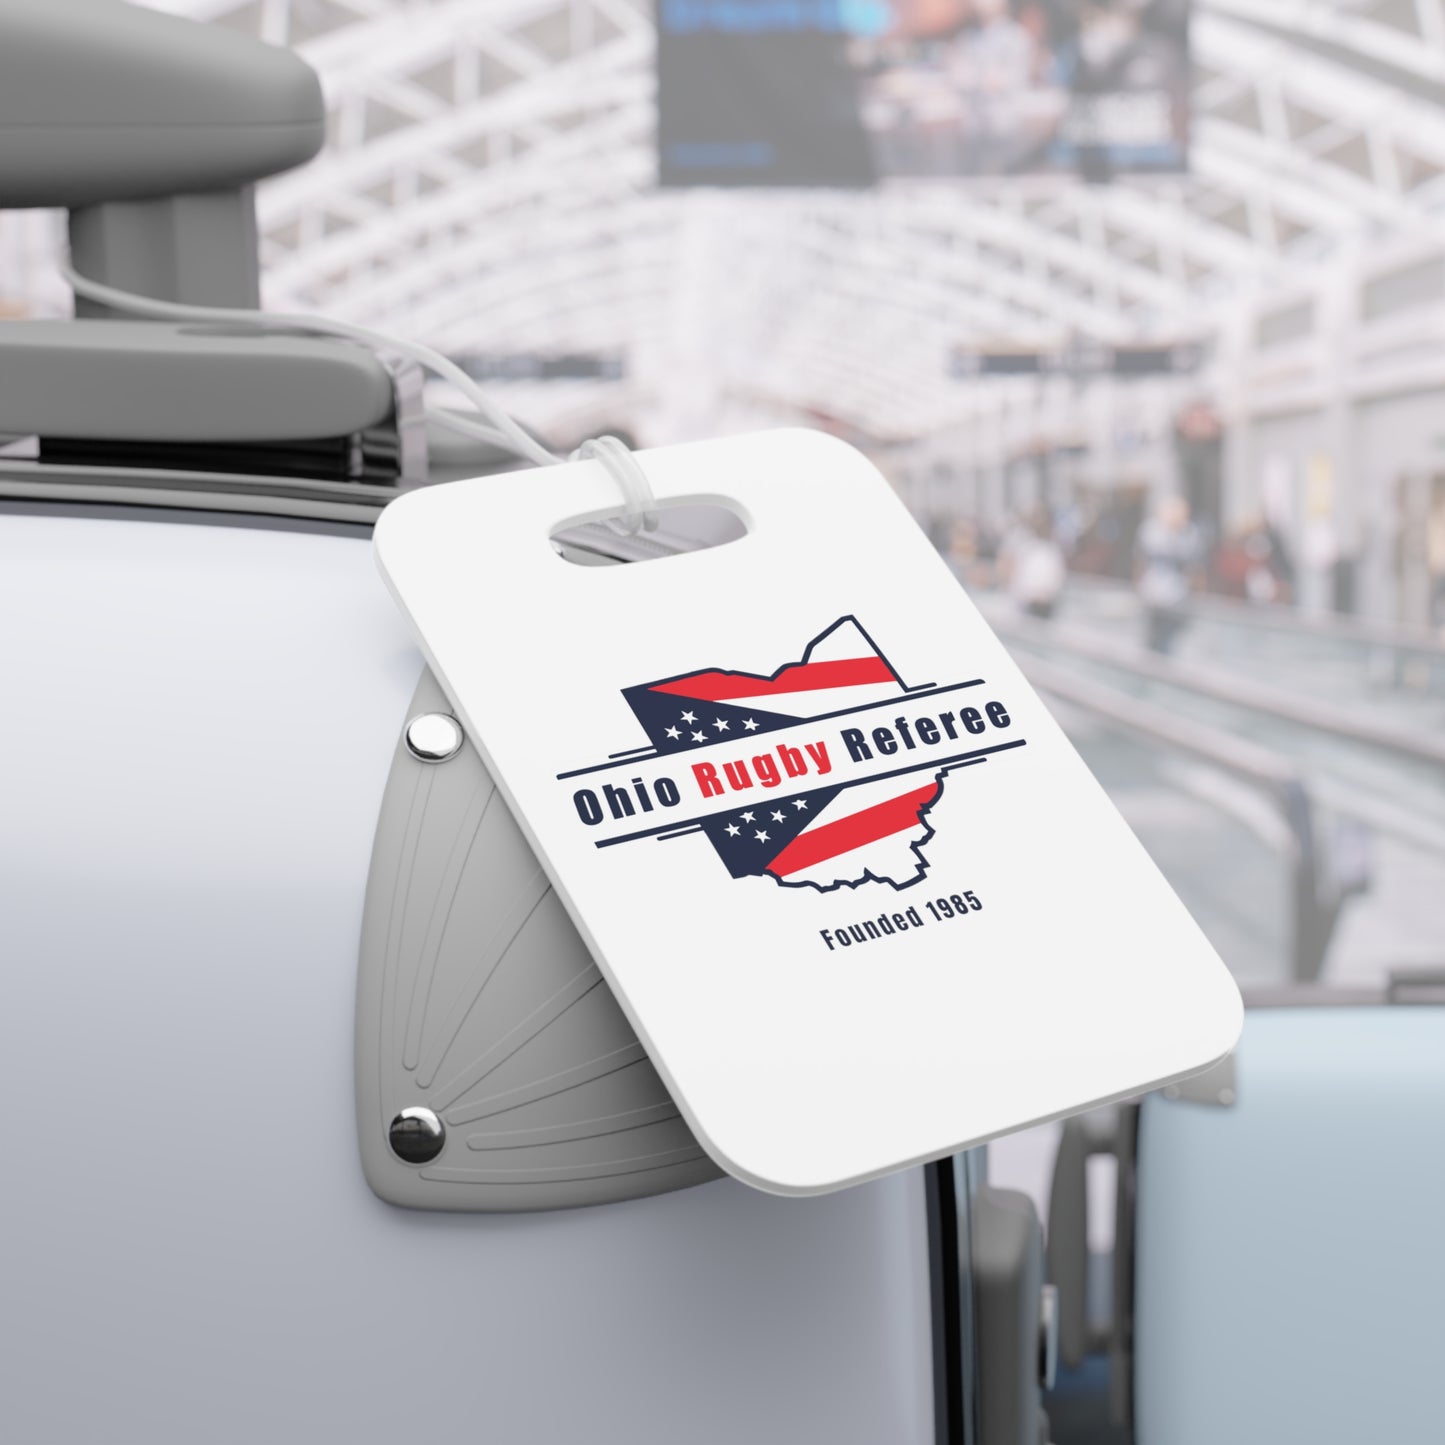 Luggage Tag | Ohio Rugby Referee Society